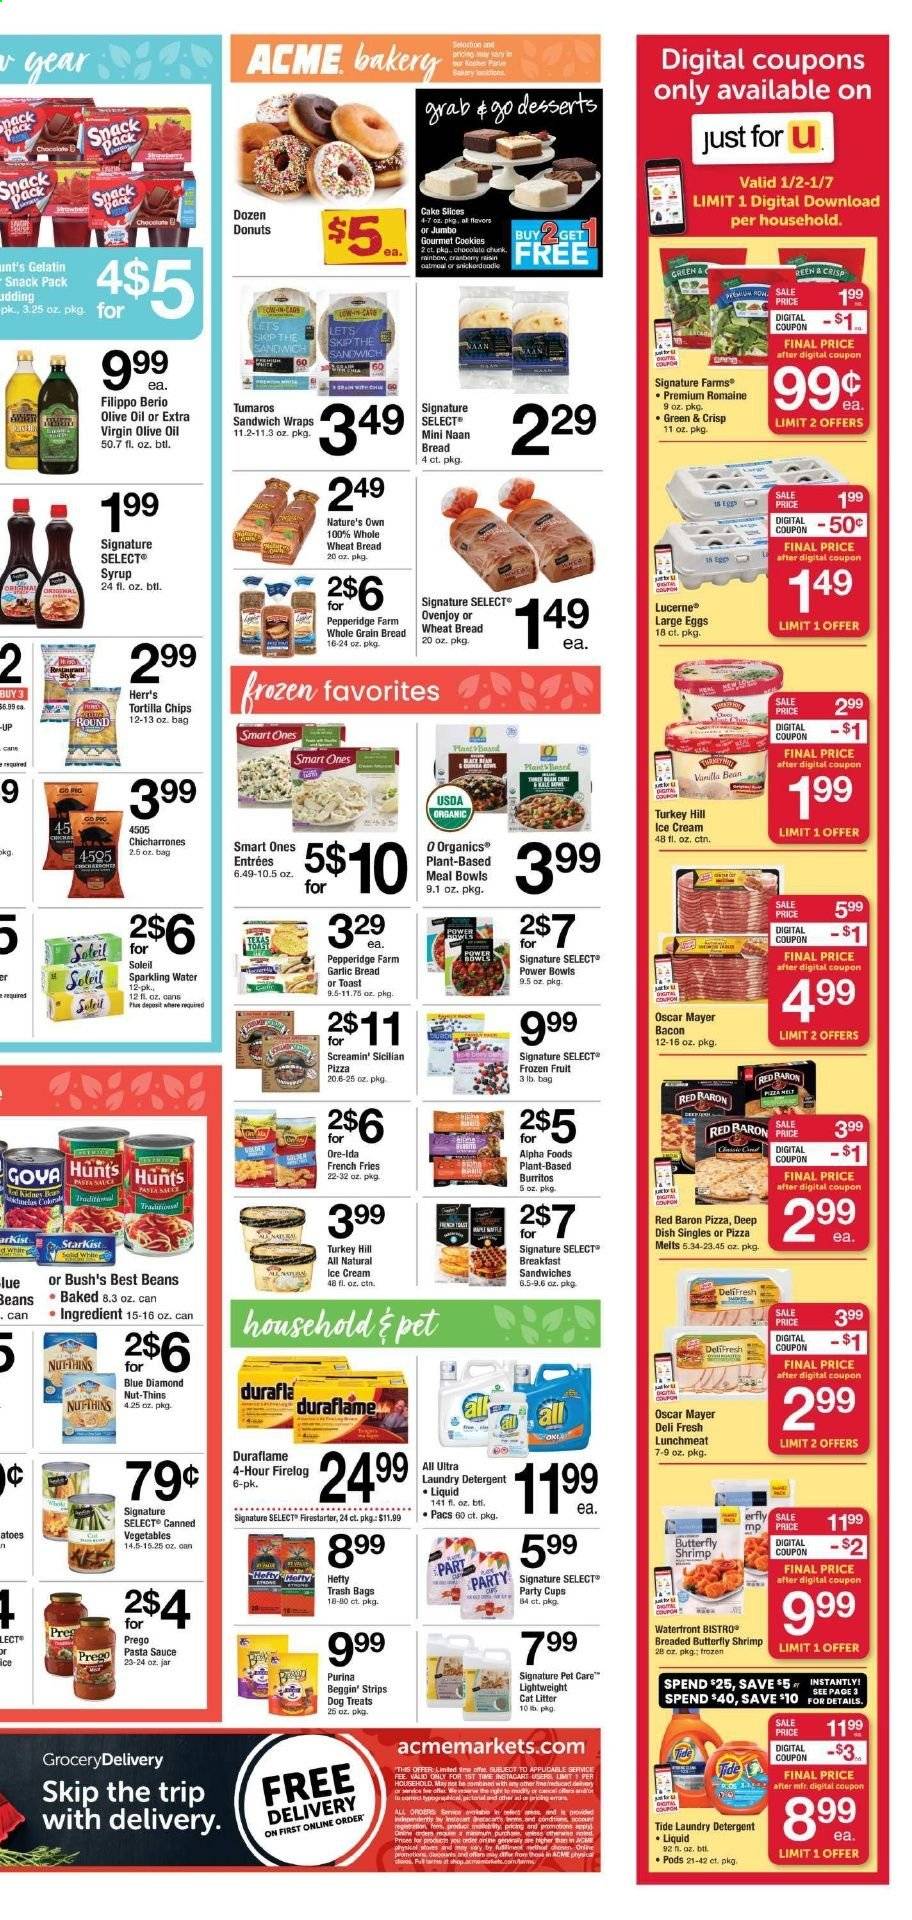 thumbnail - ACME Flyer - 01/02/2021 - 01/07/2021 - Sales products - wheat bread, toast bread, cake, donut, shrimps, StarKist, pizza, sandwich, sauce, Oscar Mayer, lunch meat, large eggs, ice cream, strips, potato fries, french fries, Ore-Ida, Screamin' Sicilian, Red Baron, cookies, tortilla chips, Thins, oatmeal, pasta sauce, extra virgin olive oil, olive oil, syrup, raisins, Blue Diamond, sparkling water, detergent, Tide, laundry detergent, Hefty, trash bags, party cups, cup, Purina, Beggin', gelatin, bag, Nature's Own. Page 3.